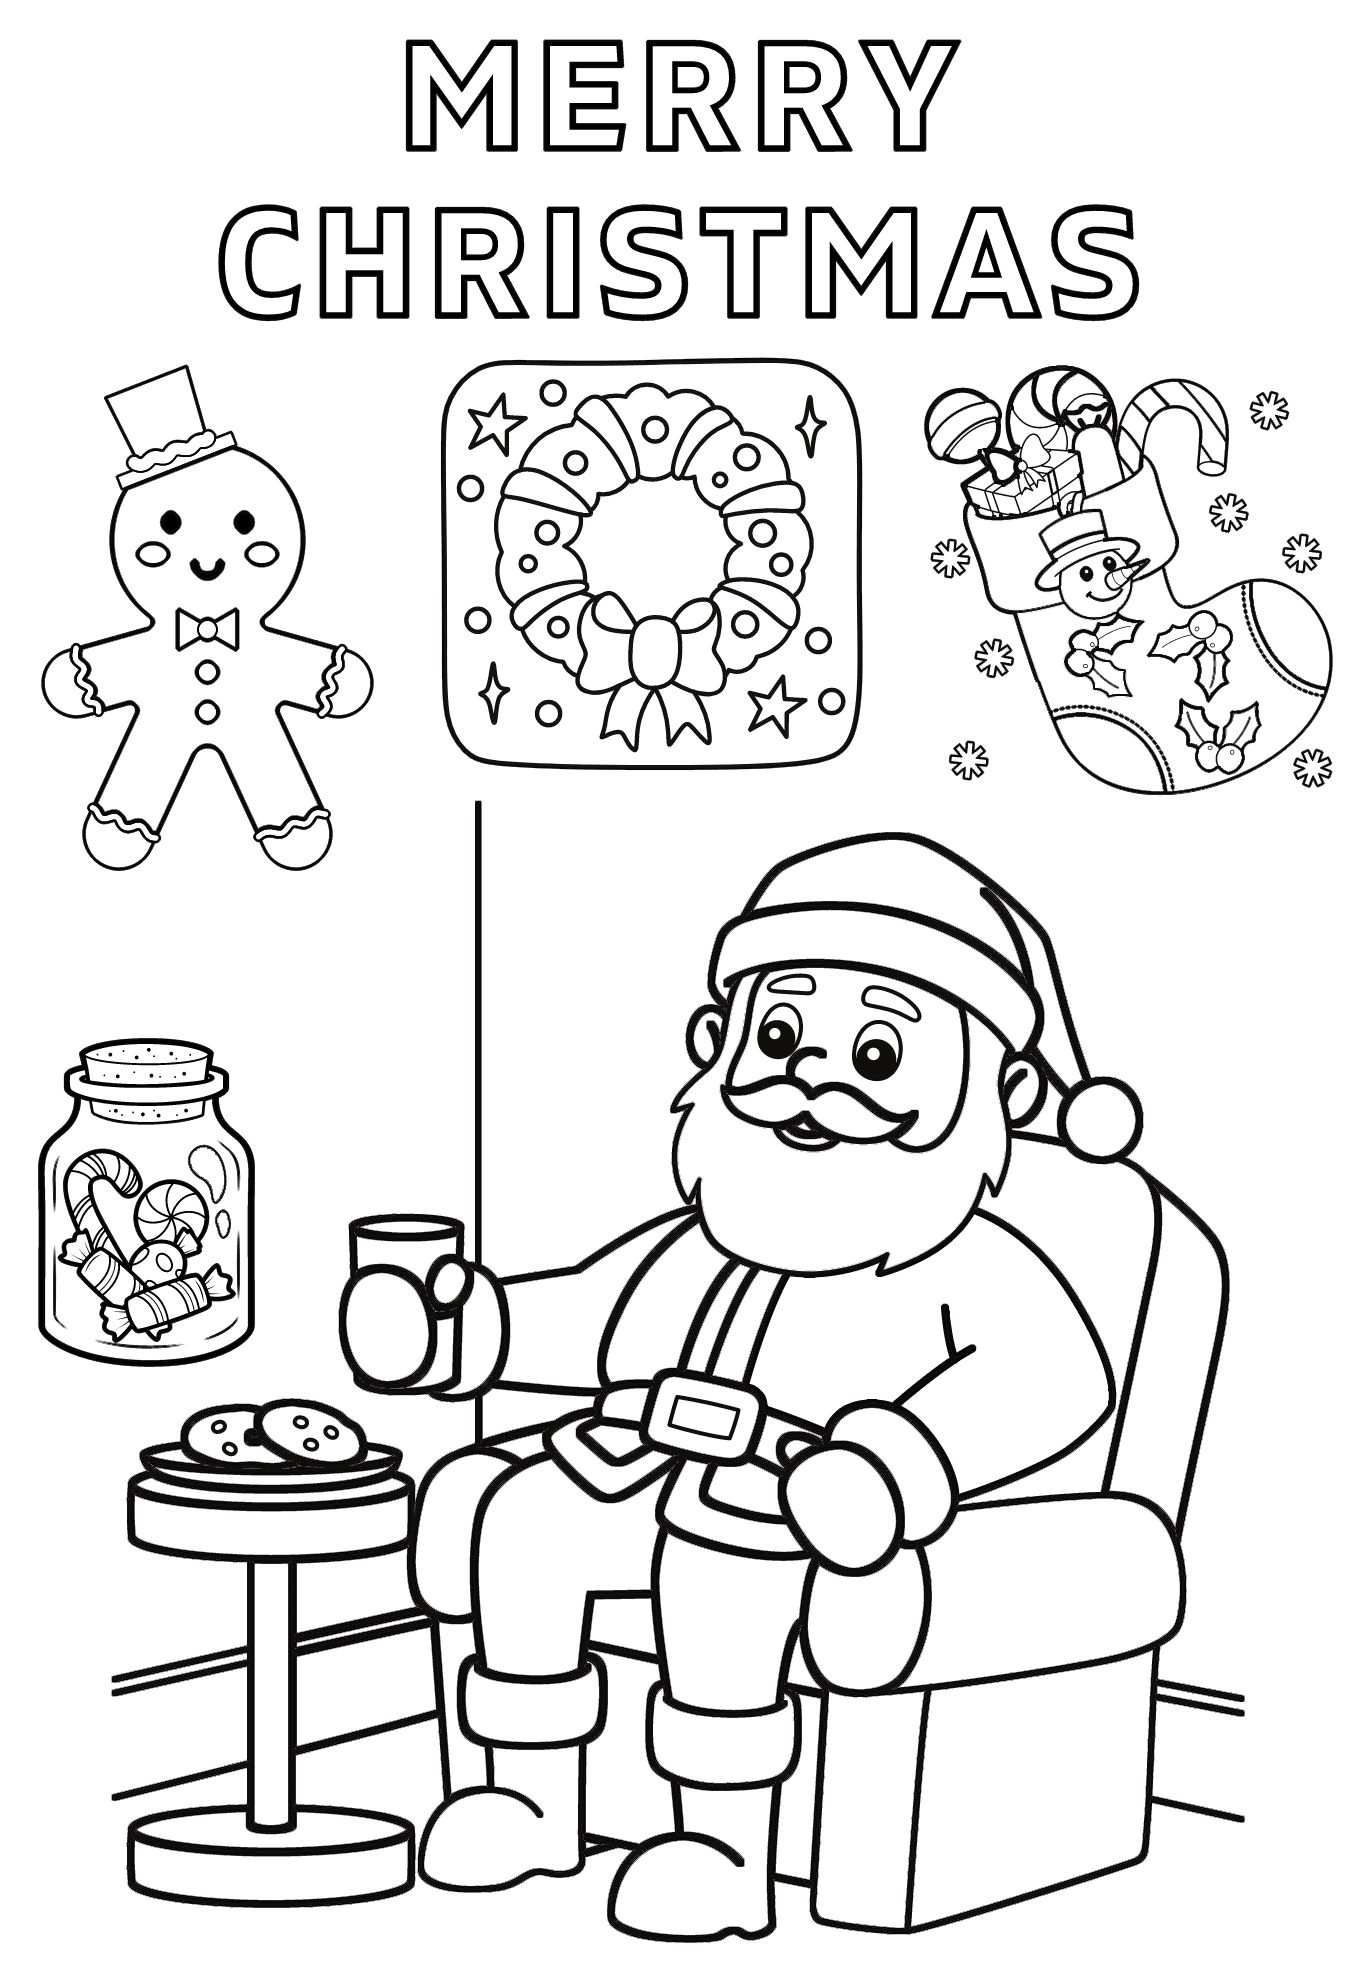 Merry Christmas Cute Image For Kids Coloring Page